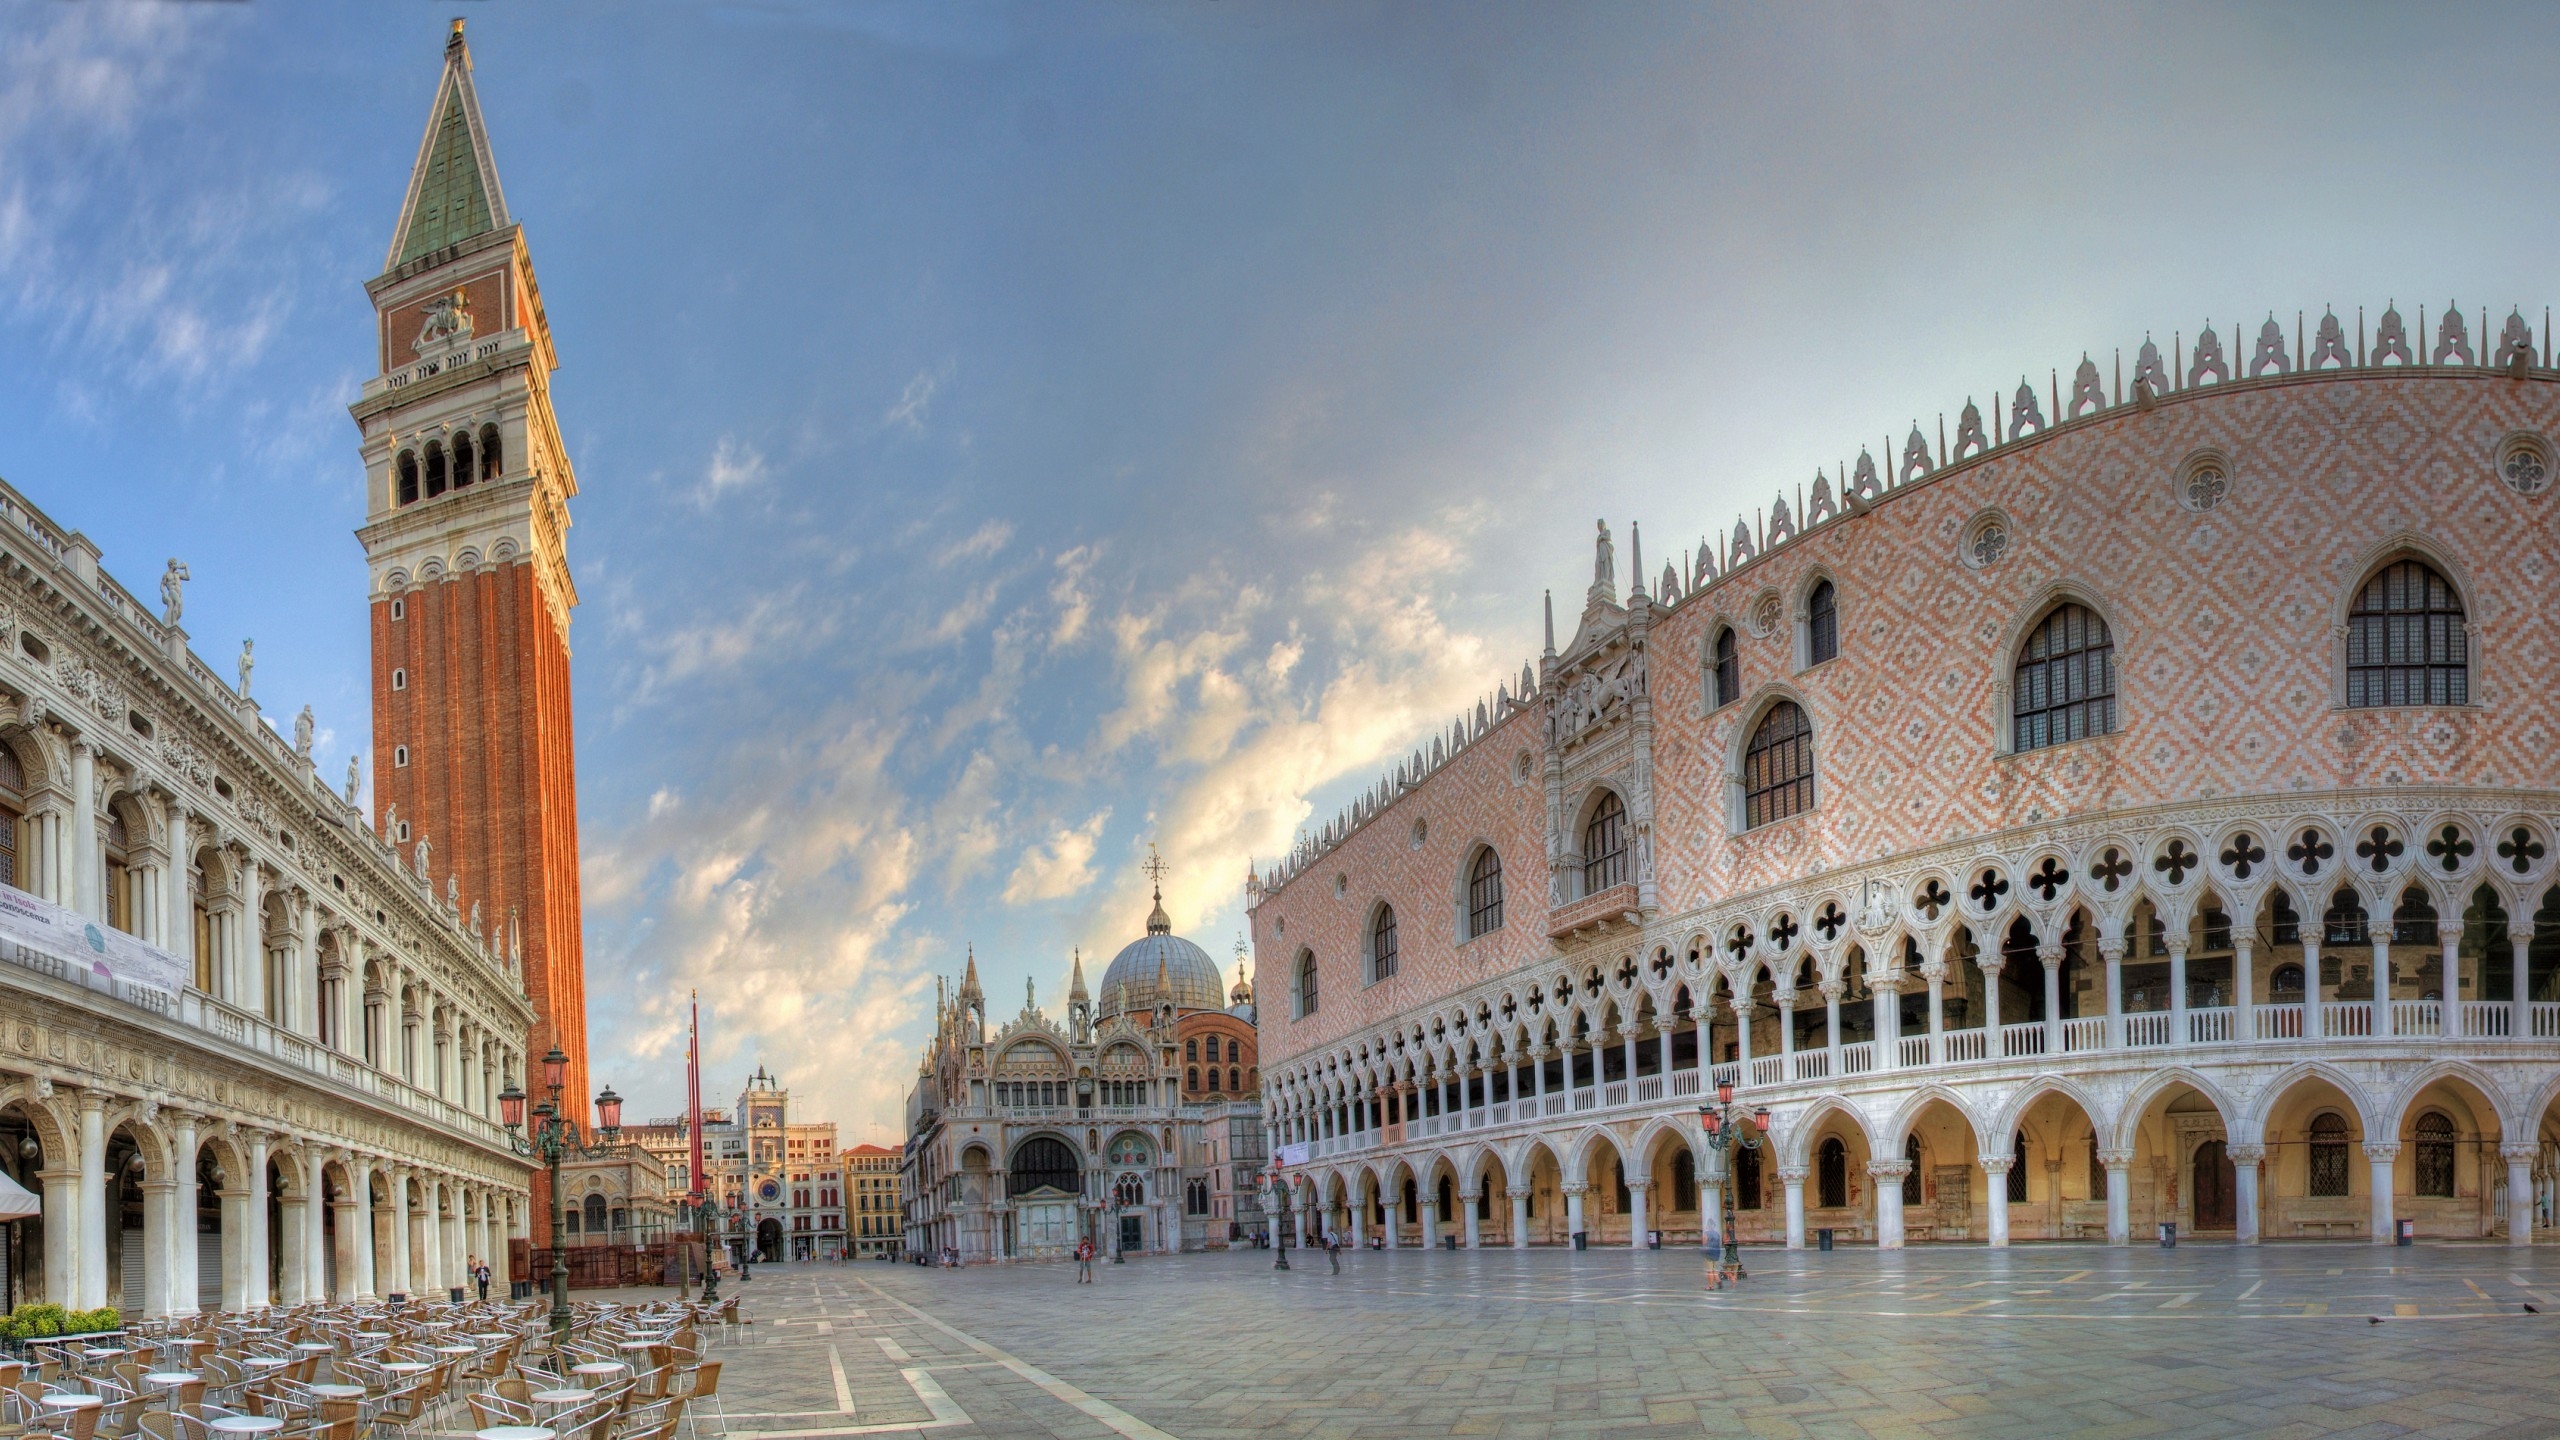 Piazza San Marco in Venice for 2560x1440 HDTV resolution